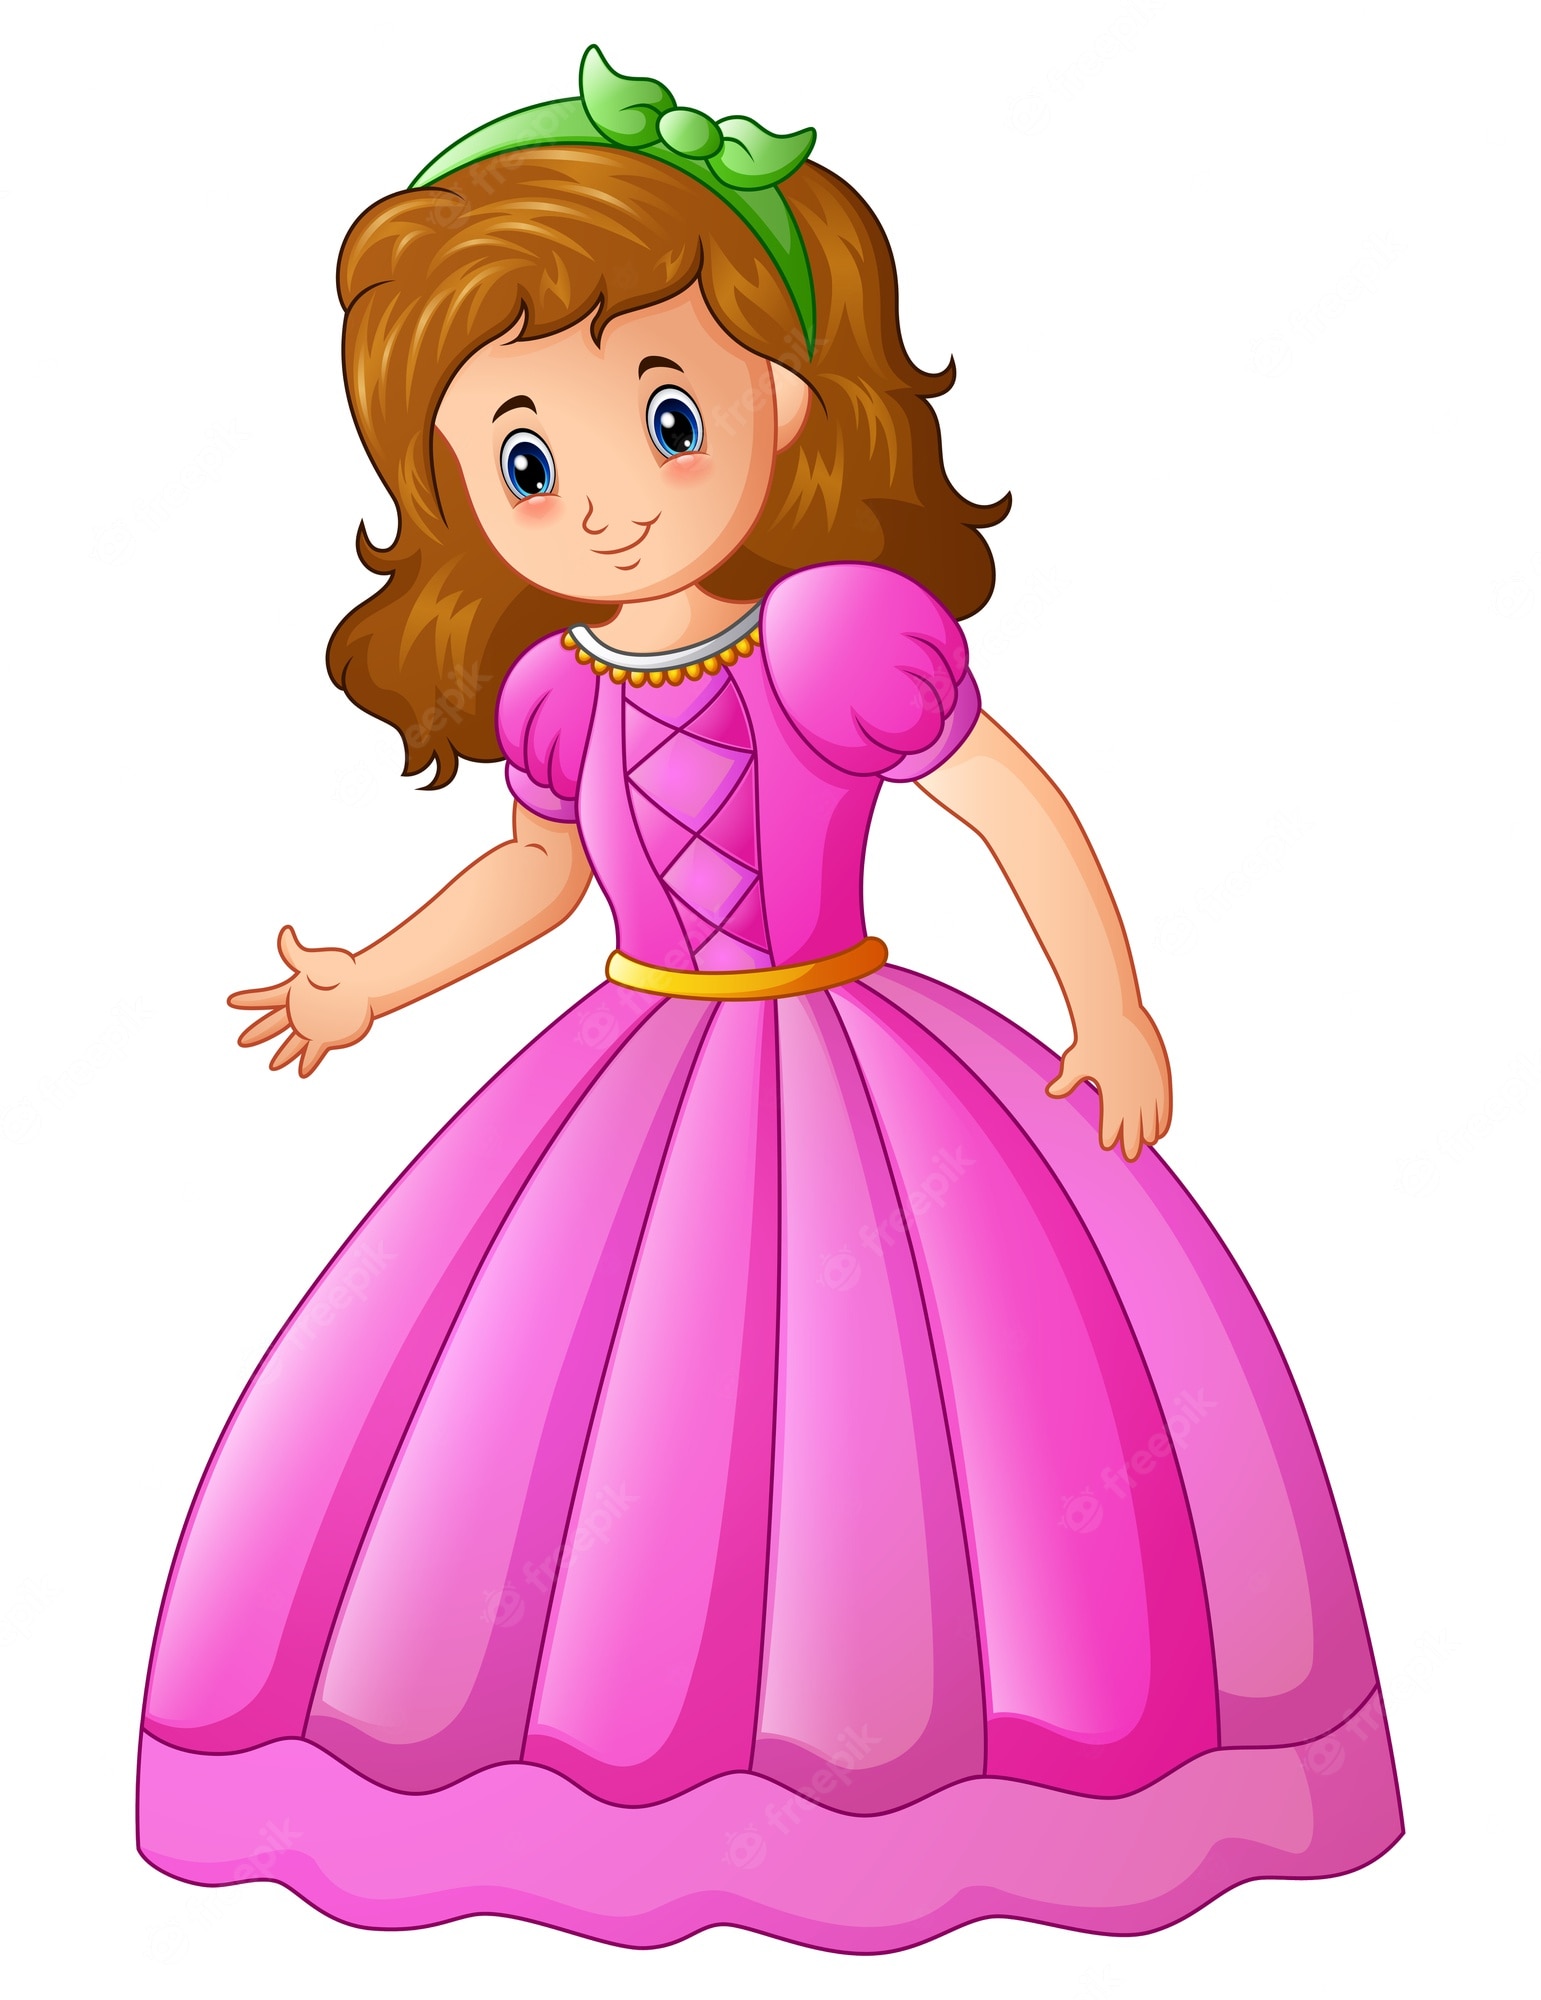 Beautiful Girl Clipart, Transparent PNG Clipart Images Free - Clip Art ...